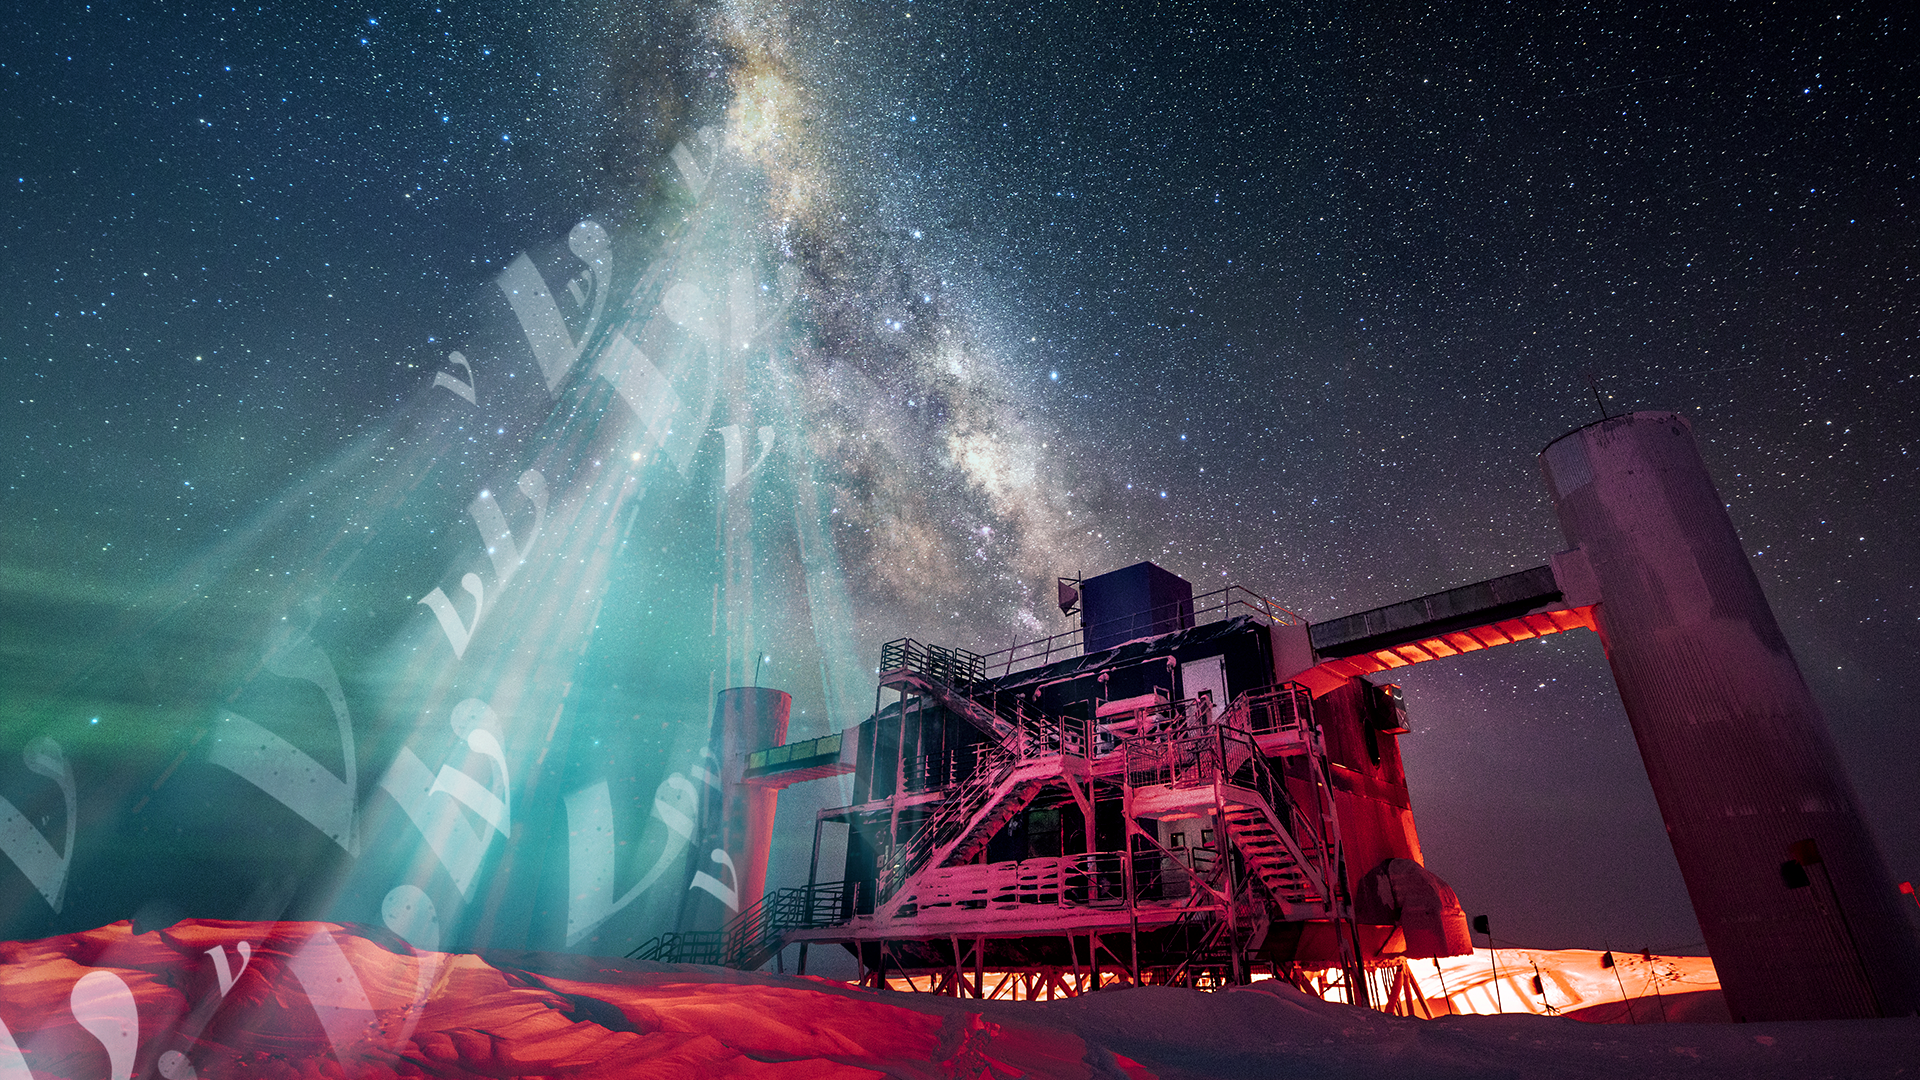 An artist's impression of neutrino emission from the Galactic plane, and IceCube Lab at the South Pole. (IceCube/NSF. Original photo by Martin Wolf)